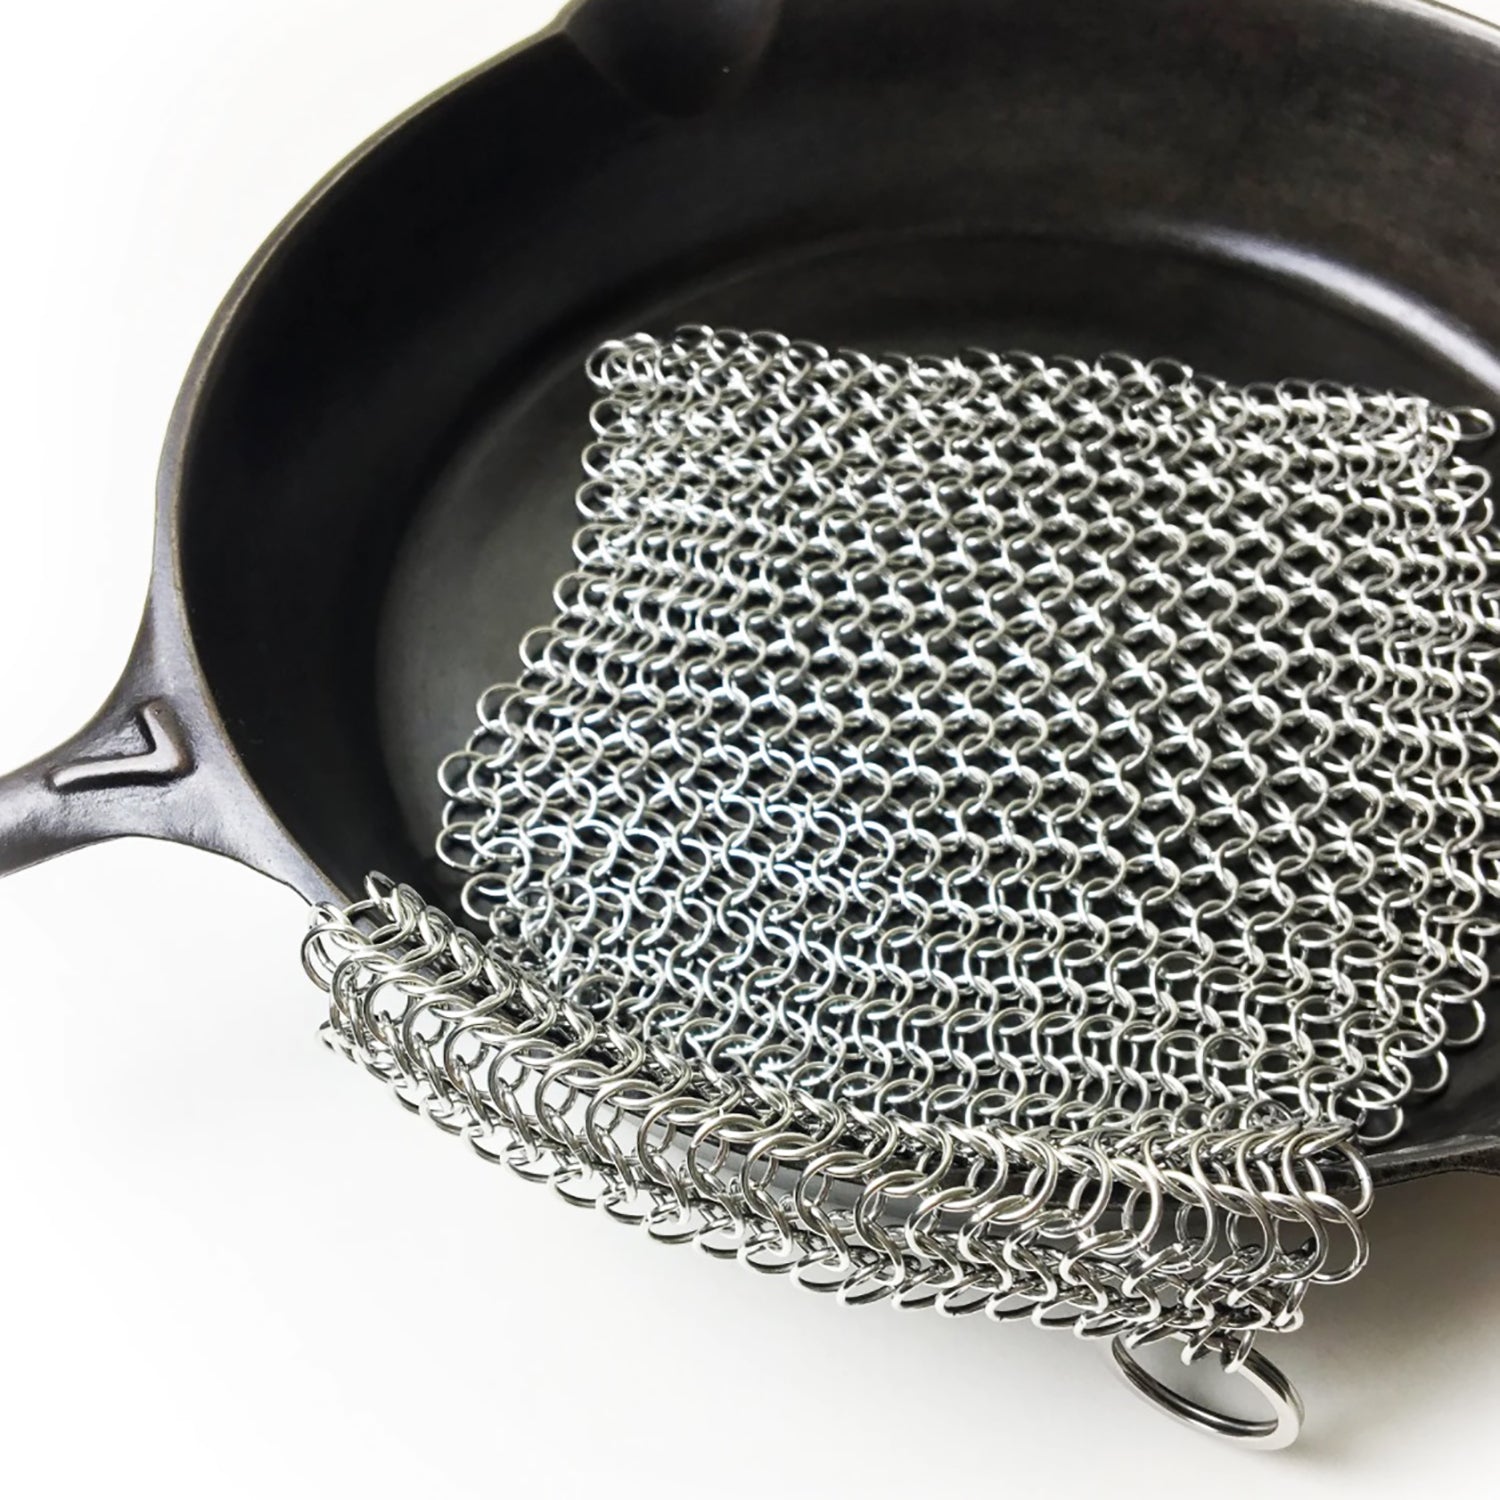 Cleaning Cast Iron with a Chain Mail Scrubber – Field Company